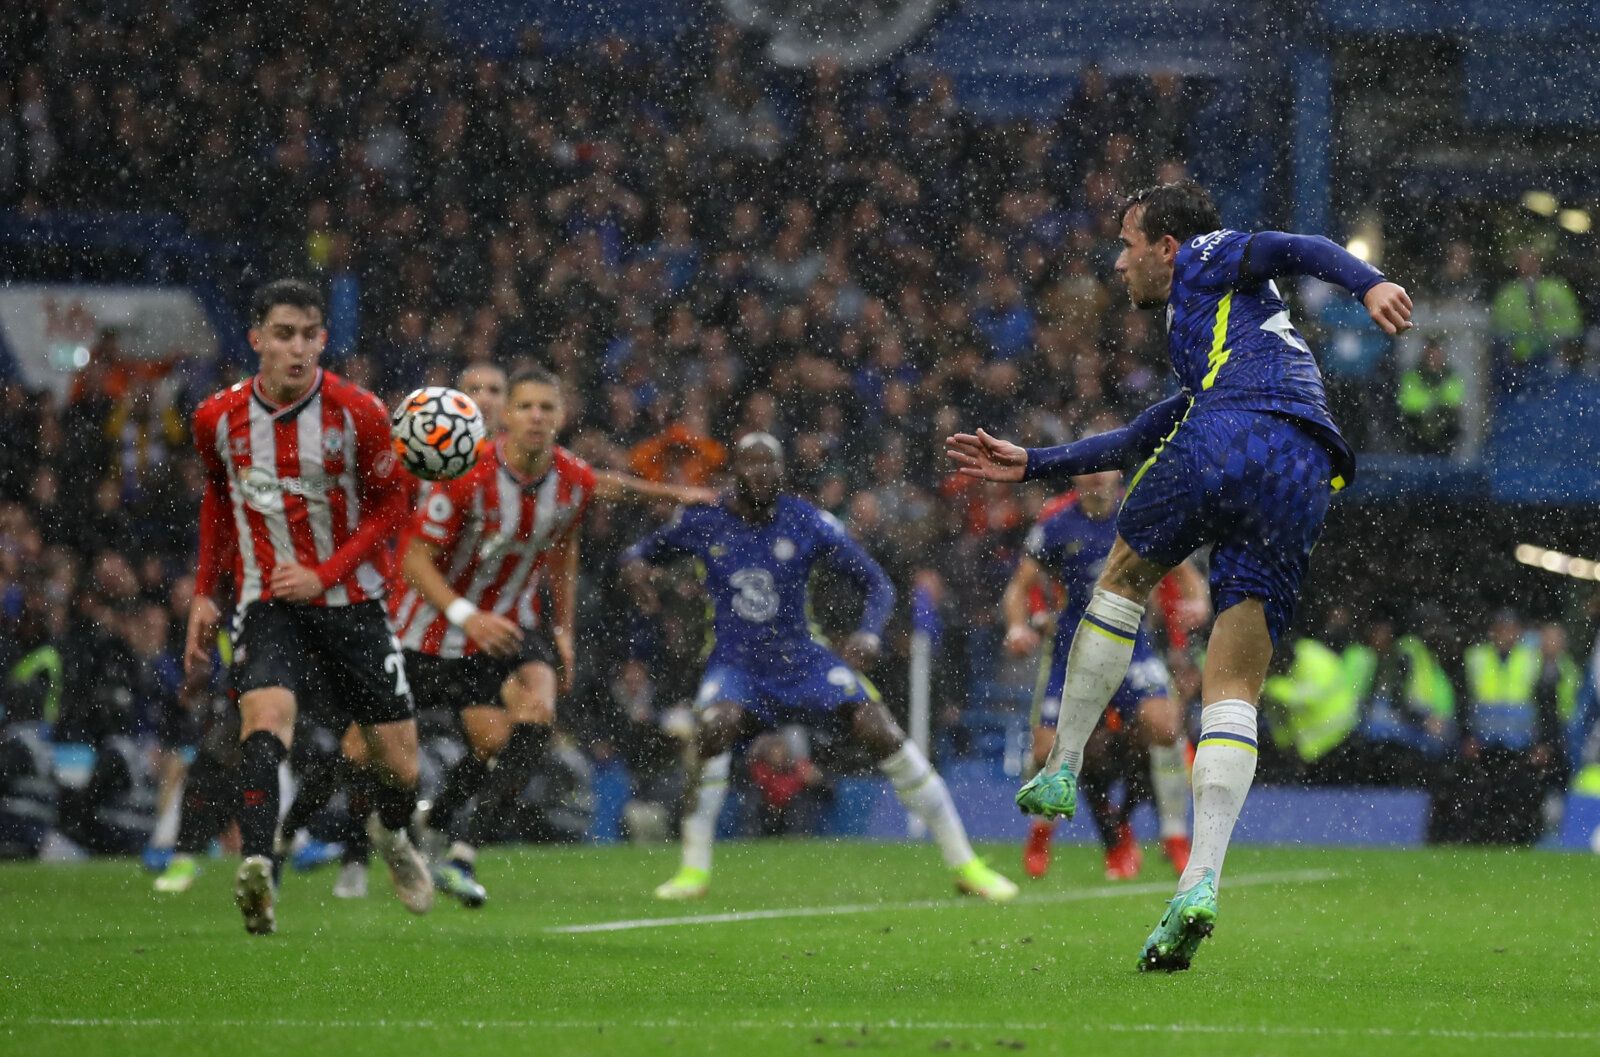 Soccer Football - Premier League - Chelsea v Southampton - Stamford Bridge, London, Britain - October 2, 2021  Chelsea's Ben Chilwell scores their third goal REUTERS/David Klein EDITORIAL USE ONLY. No use with unauthorized audio, video, data, fixture lists, club/league logos or 'live' services. Online in-match use limited to 75 images, no video emulation. No use in betting, games or single club /league/player publications.  Please contact your account representative for further details.